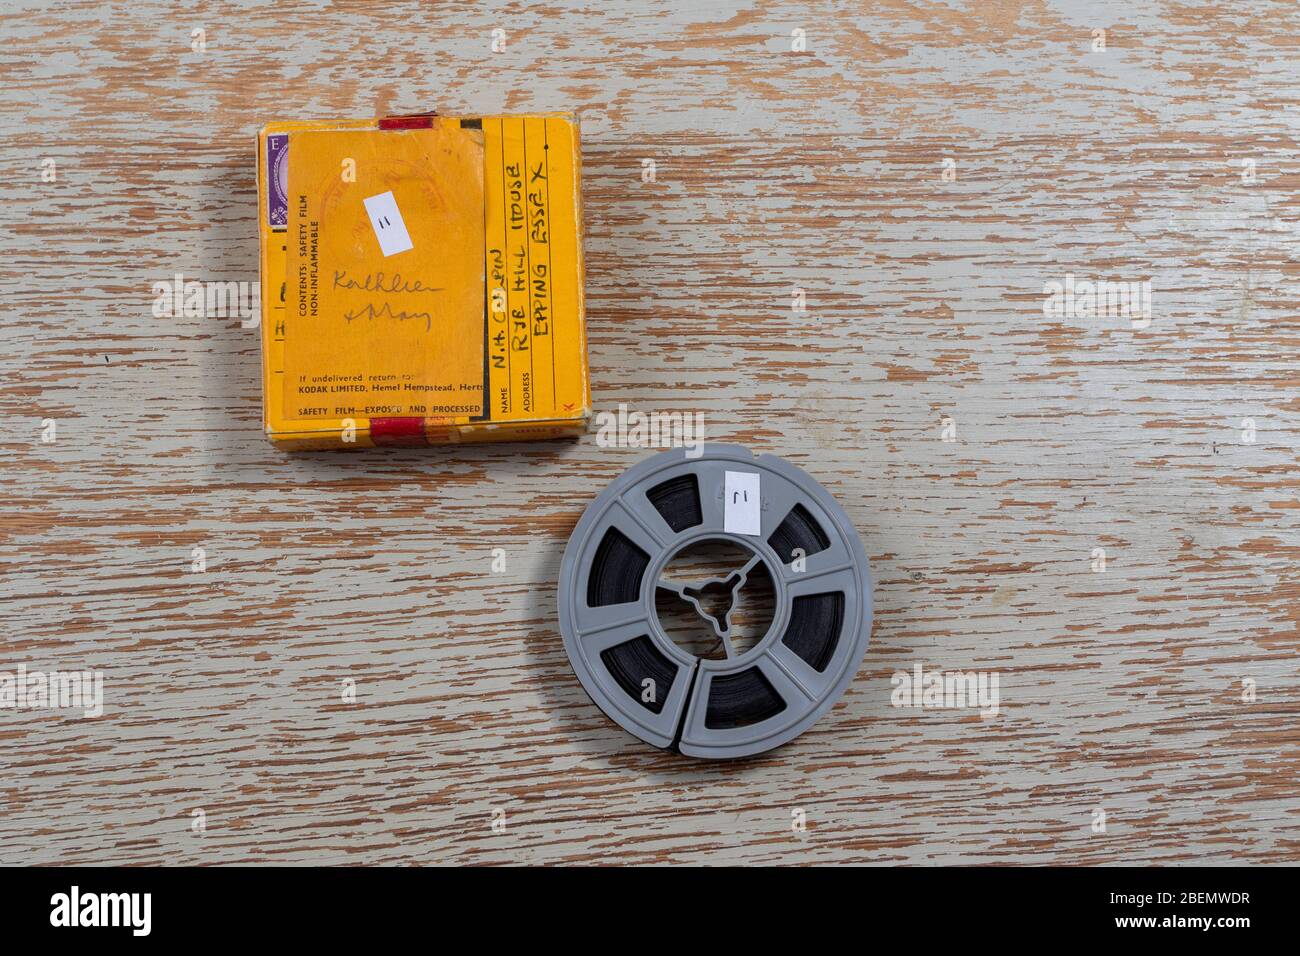 A small spool of 8mm film with its cardboard box Stock Photo - Alamy